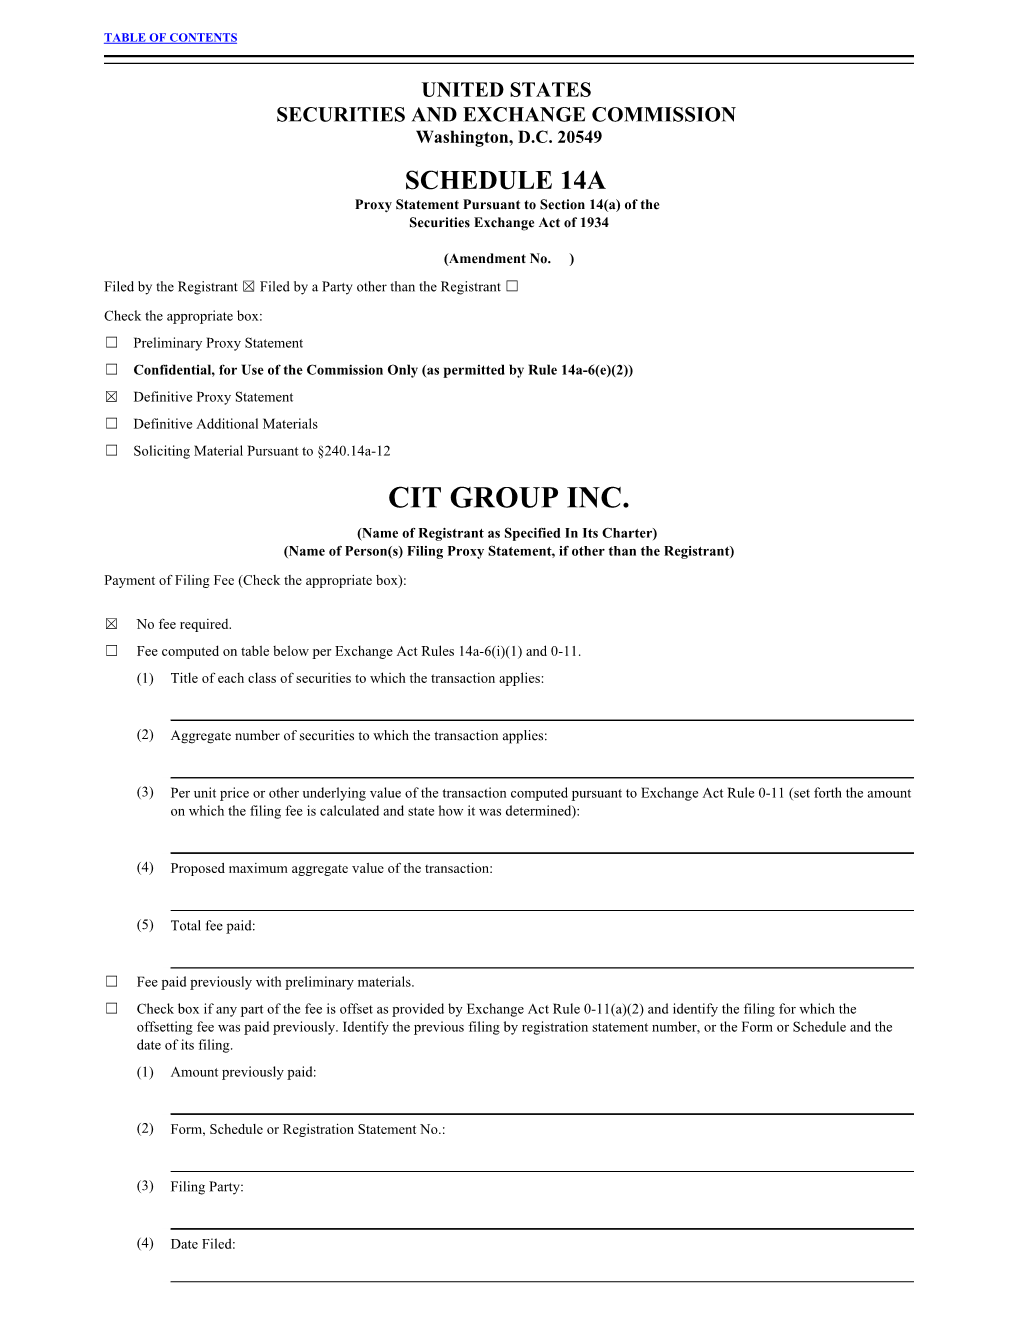 CIT GROUP INC. (Name of Registrant As Specified in Its Charter) (Name of Person(S) Filing Proxy Statement, If Other Than the Registrant)